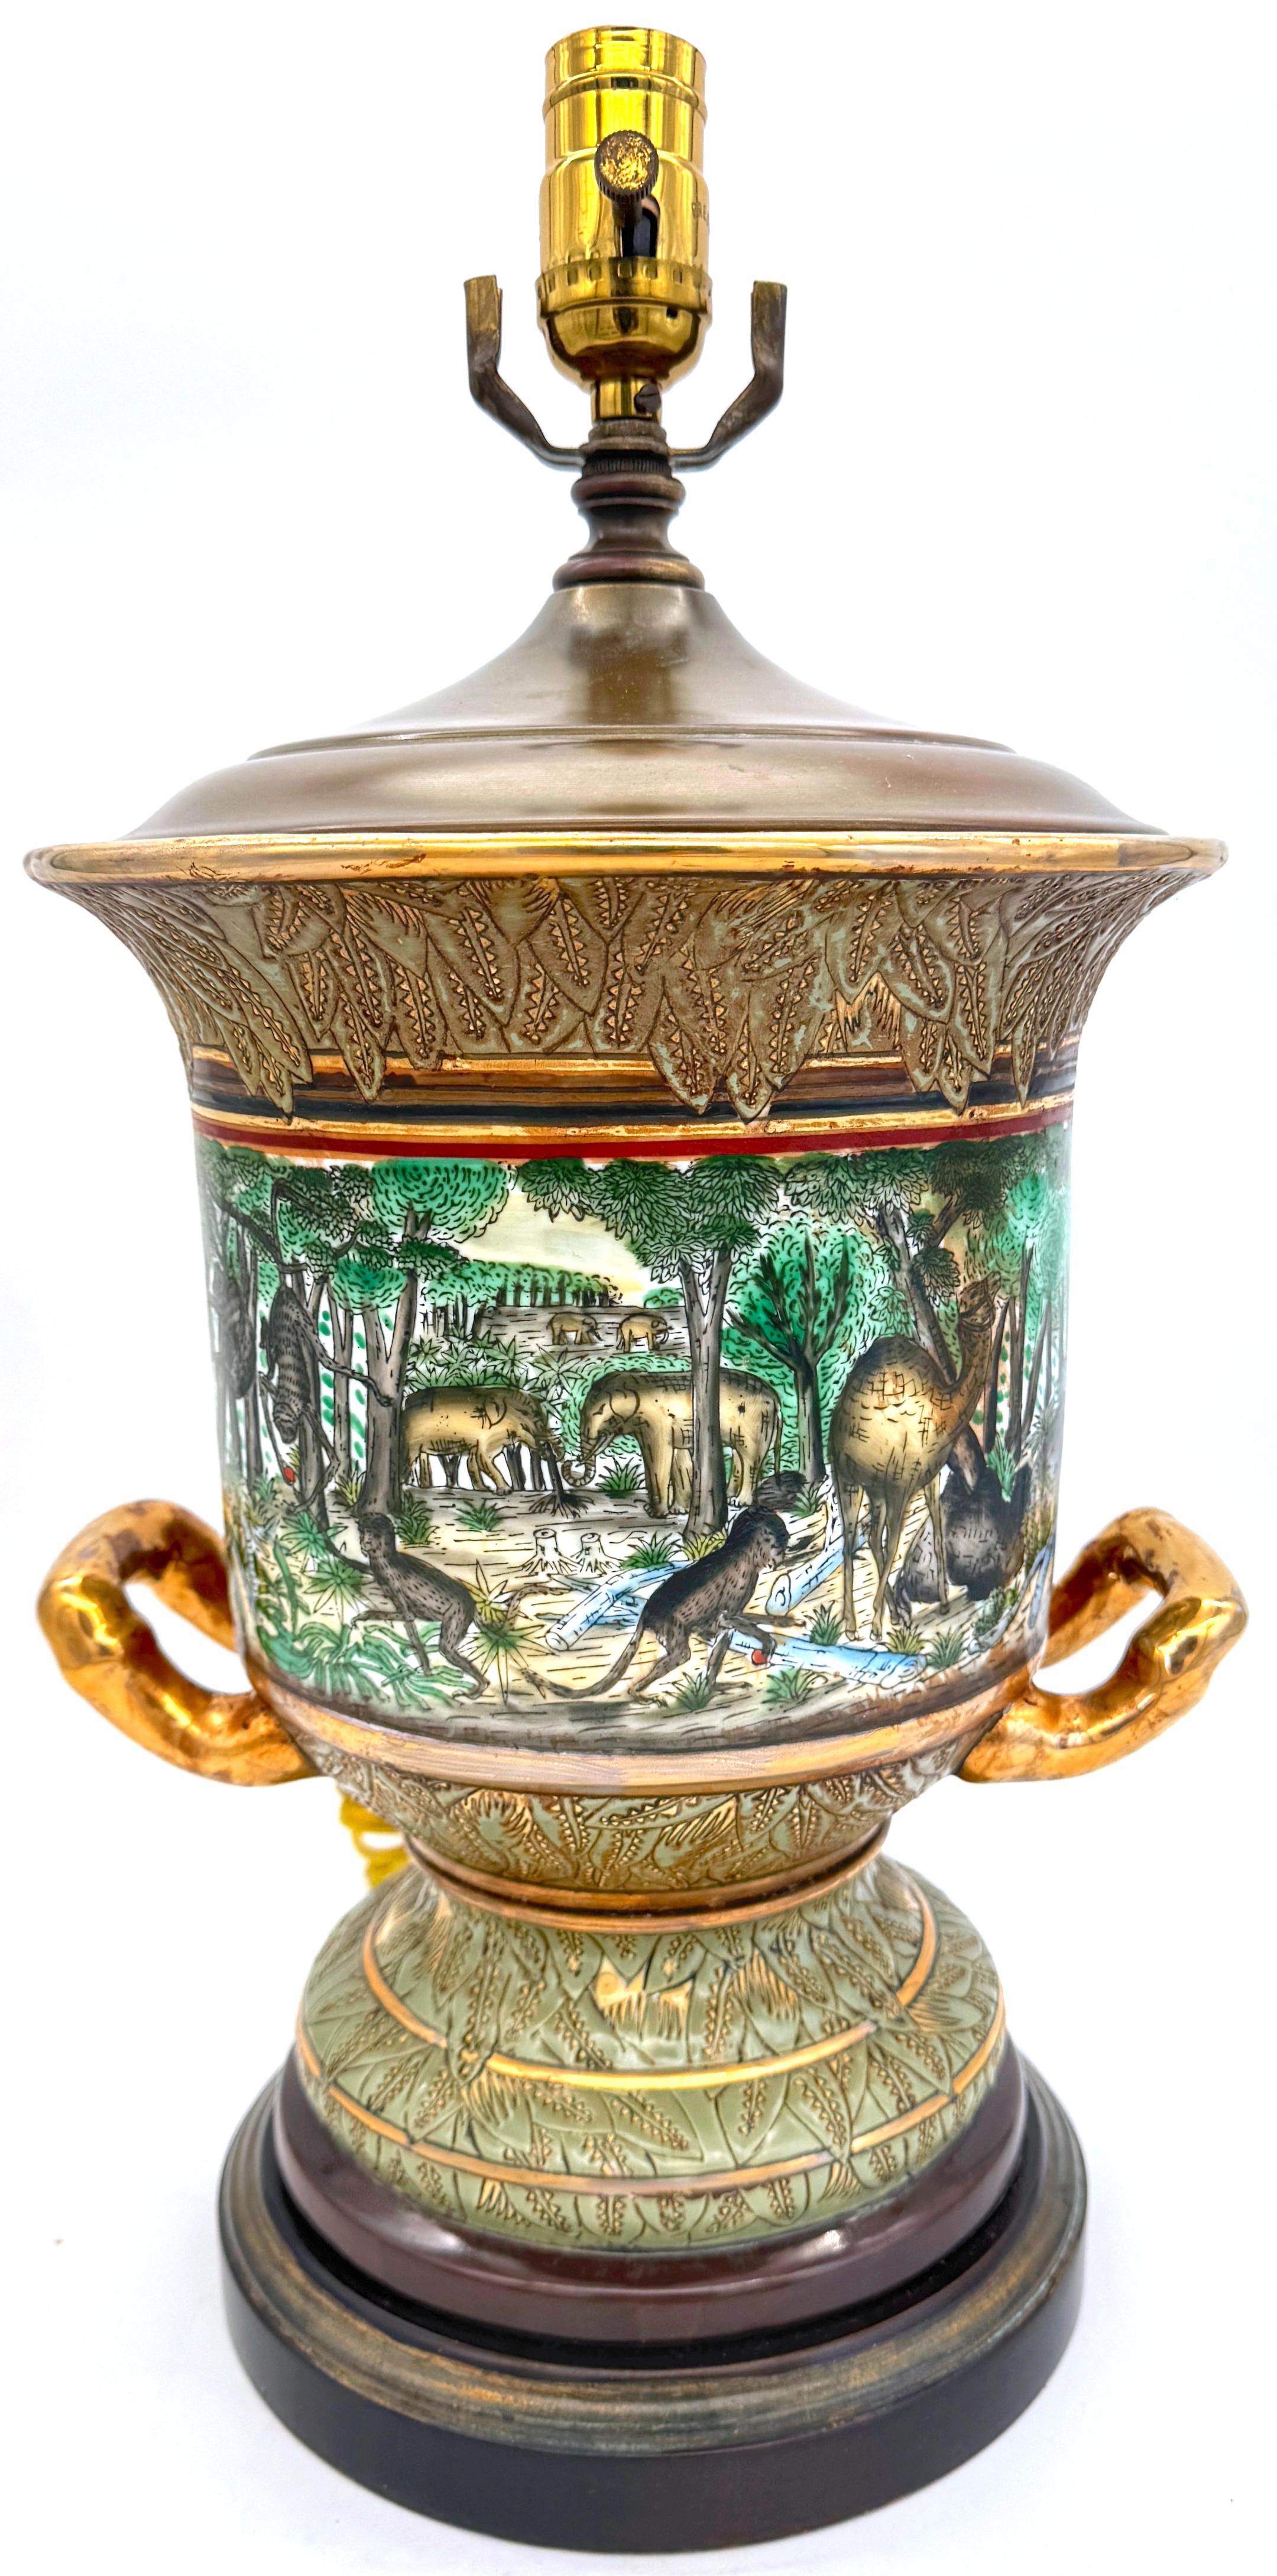 Neoclassical Old Paris Style Exotic Jungle Landscape Campana Urn Lamp
France, 20th century 

An exquisite Neoclassical Old Paris Style Exotic Jungle Landscape Campana Urn Lamp, originating from France in the 20th century Standing impressively at 19